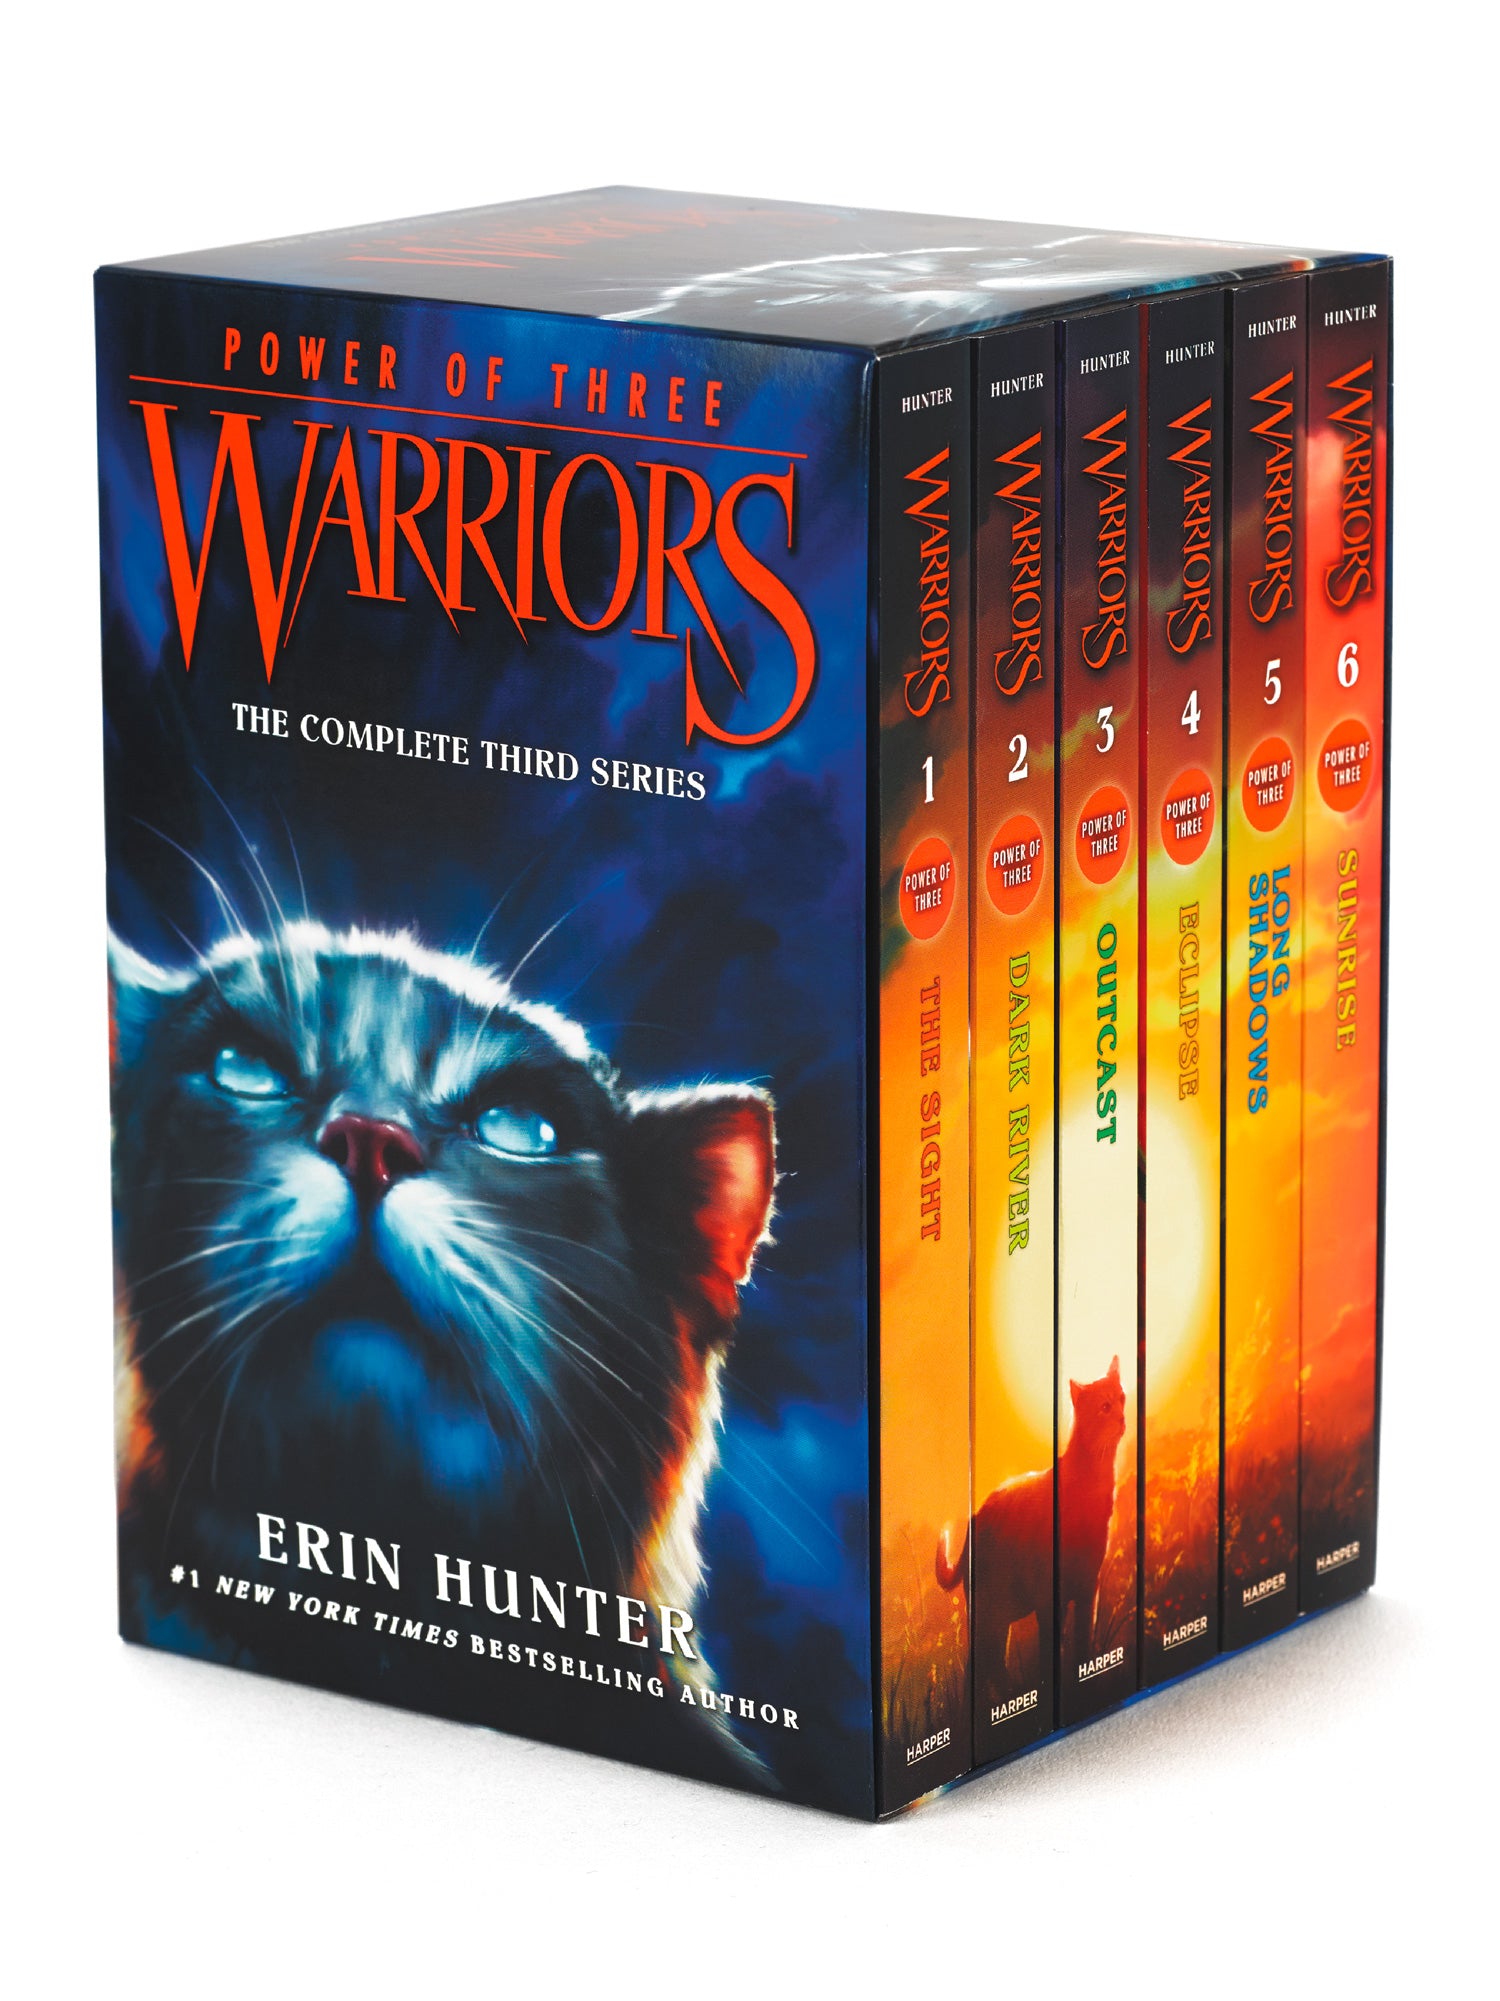 Warrior Cats Volume1 To 12 Books Young Adult Pack Paperback Set By Erin  Hunter